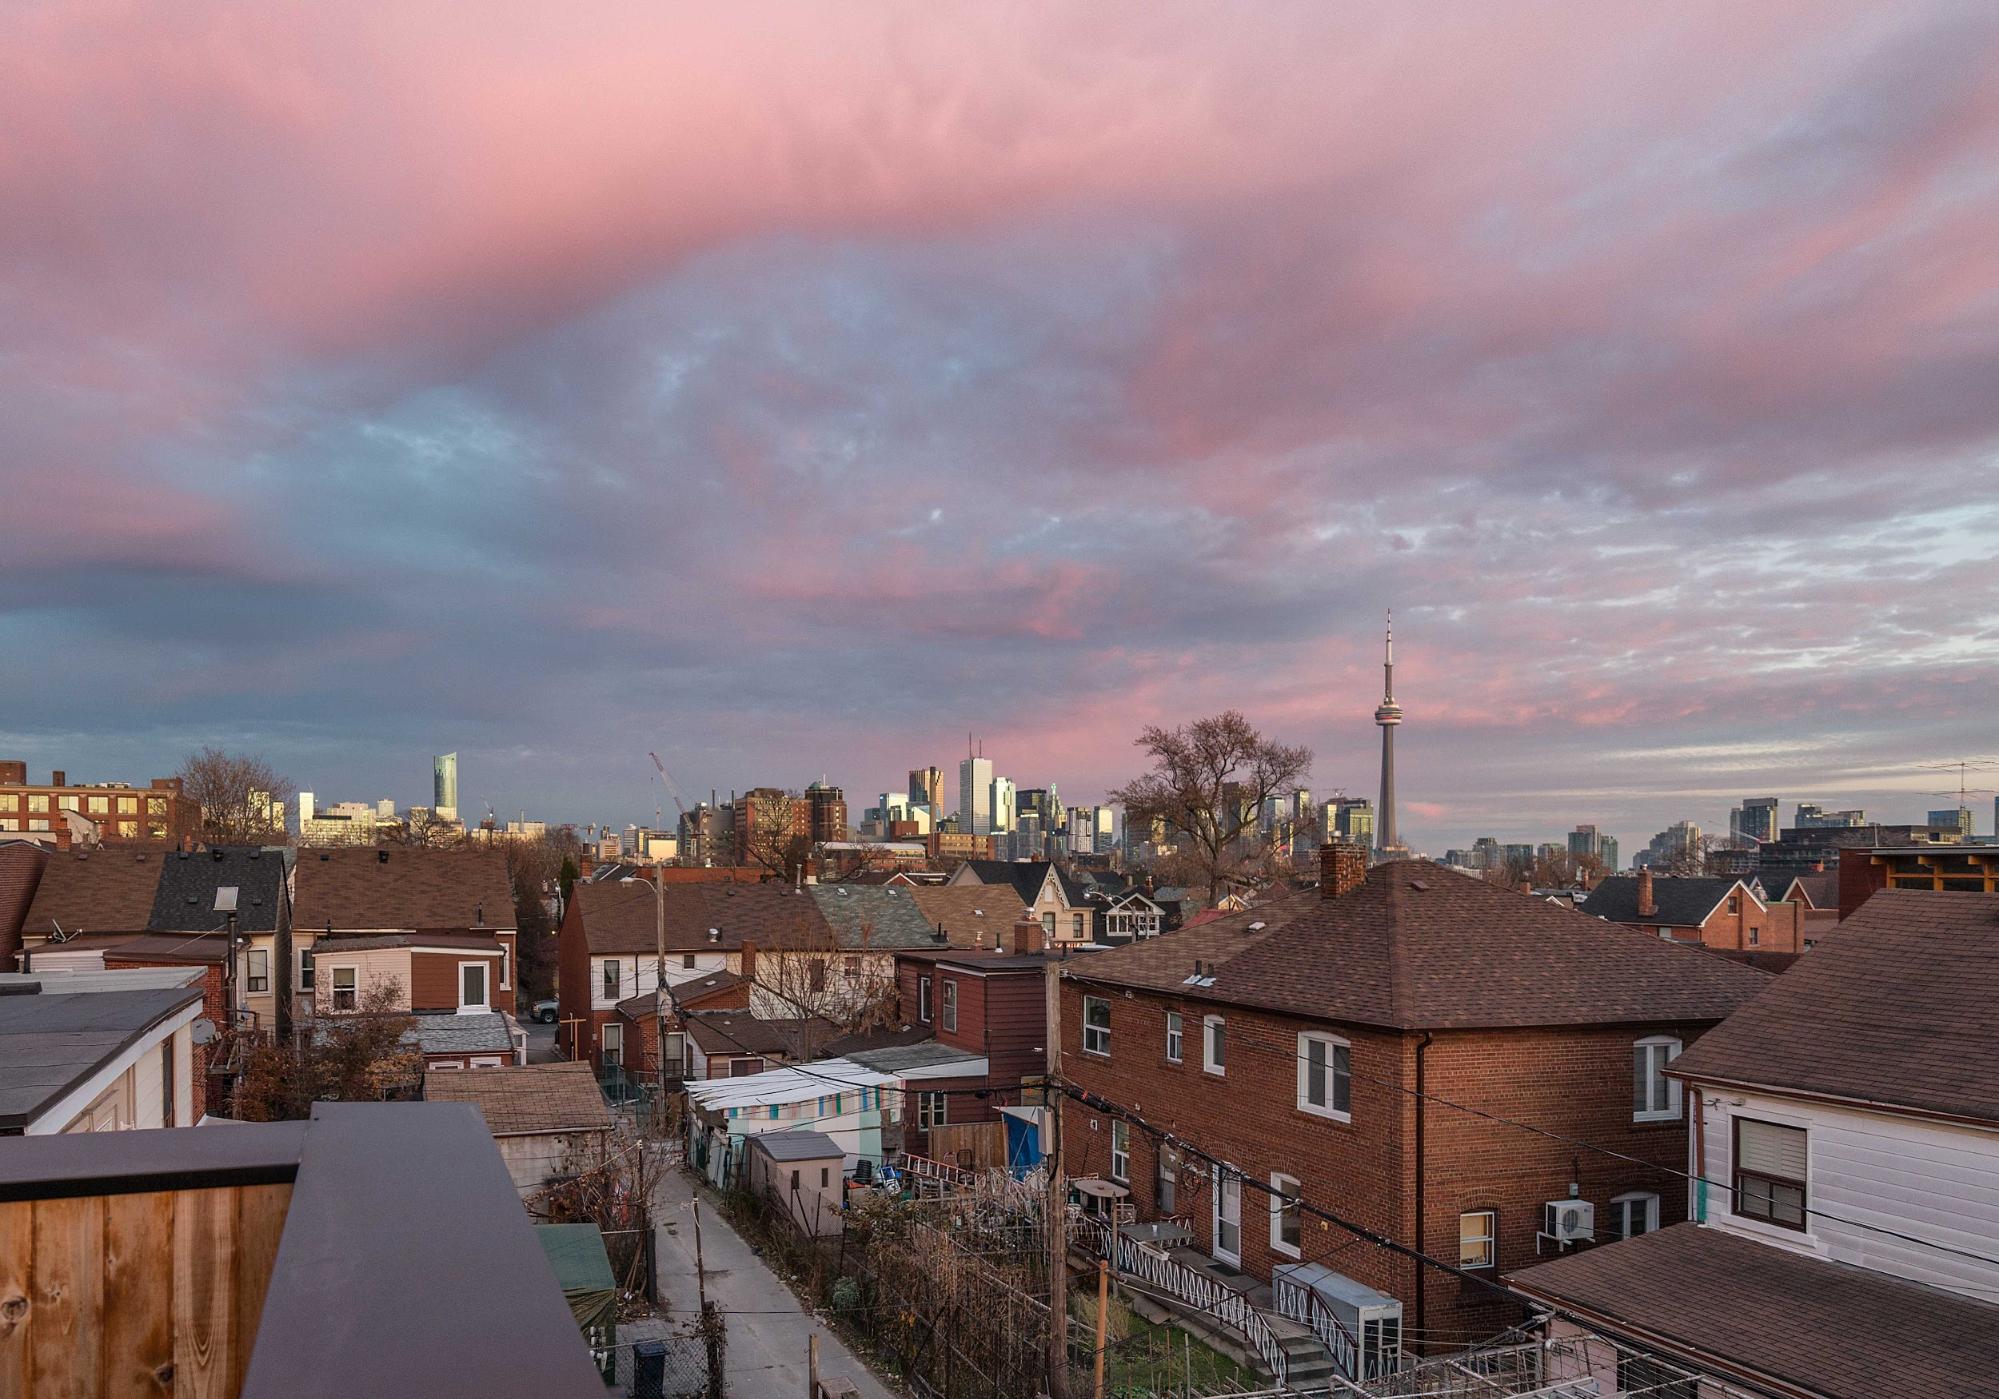 The sunset view featuring cotton candy clouds from a third floor balcony in Toronto of the Modern Victorian House designed by FrankFranco Architects.